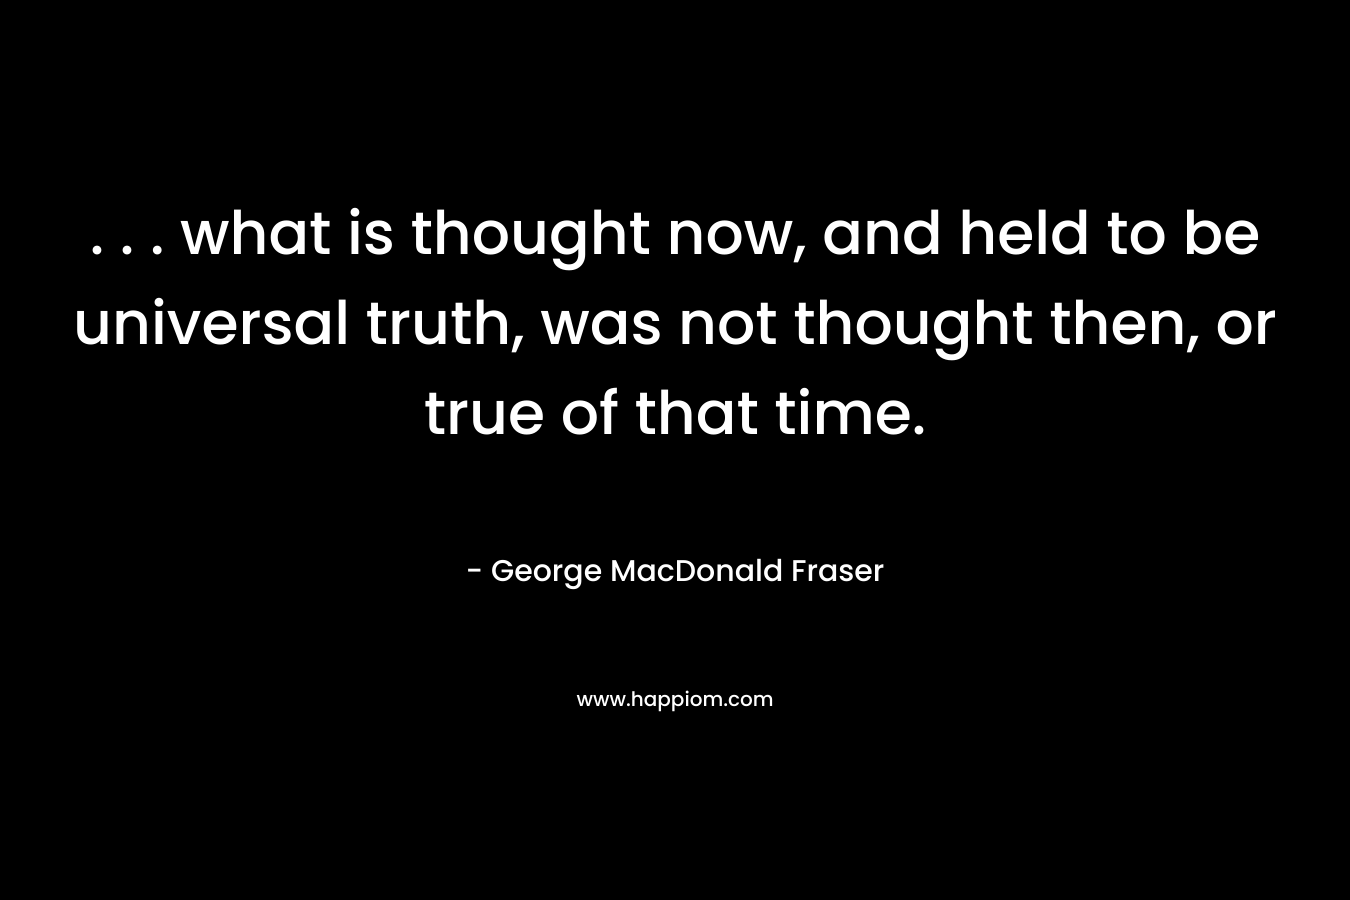 . . . what is thought now, and held to be universal truth, was not thought then, or true of that time. – George MacDonald Fraser